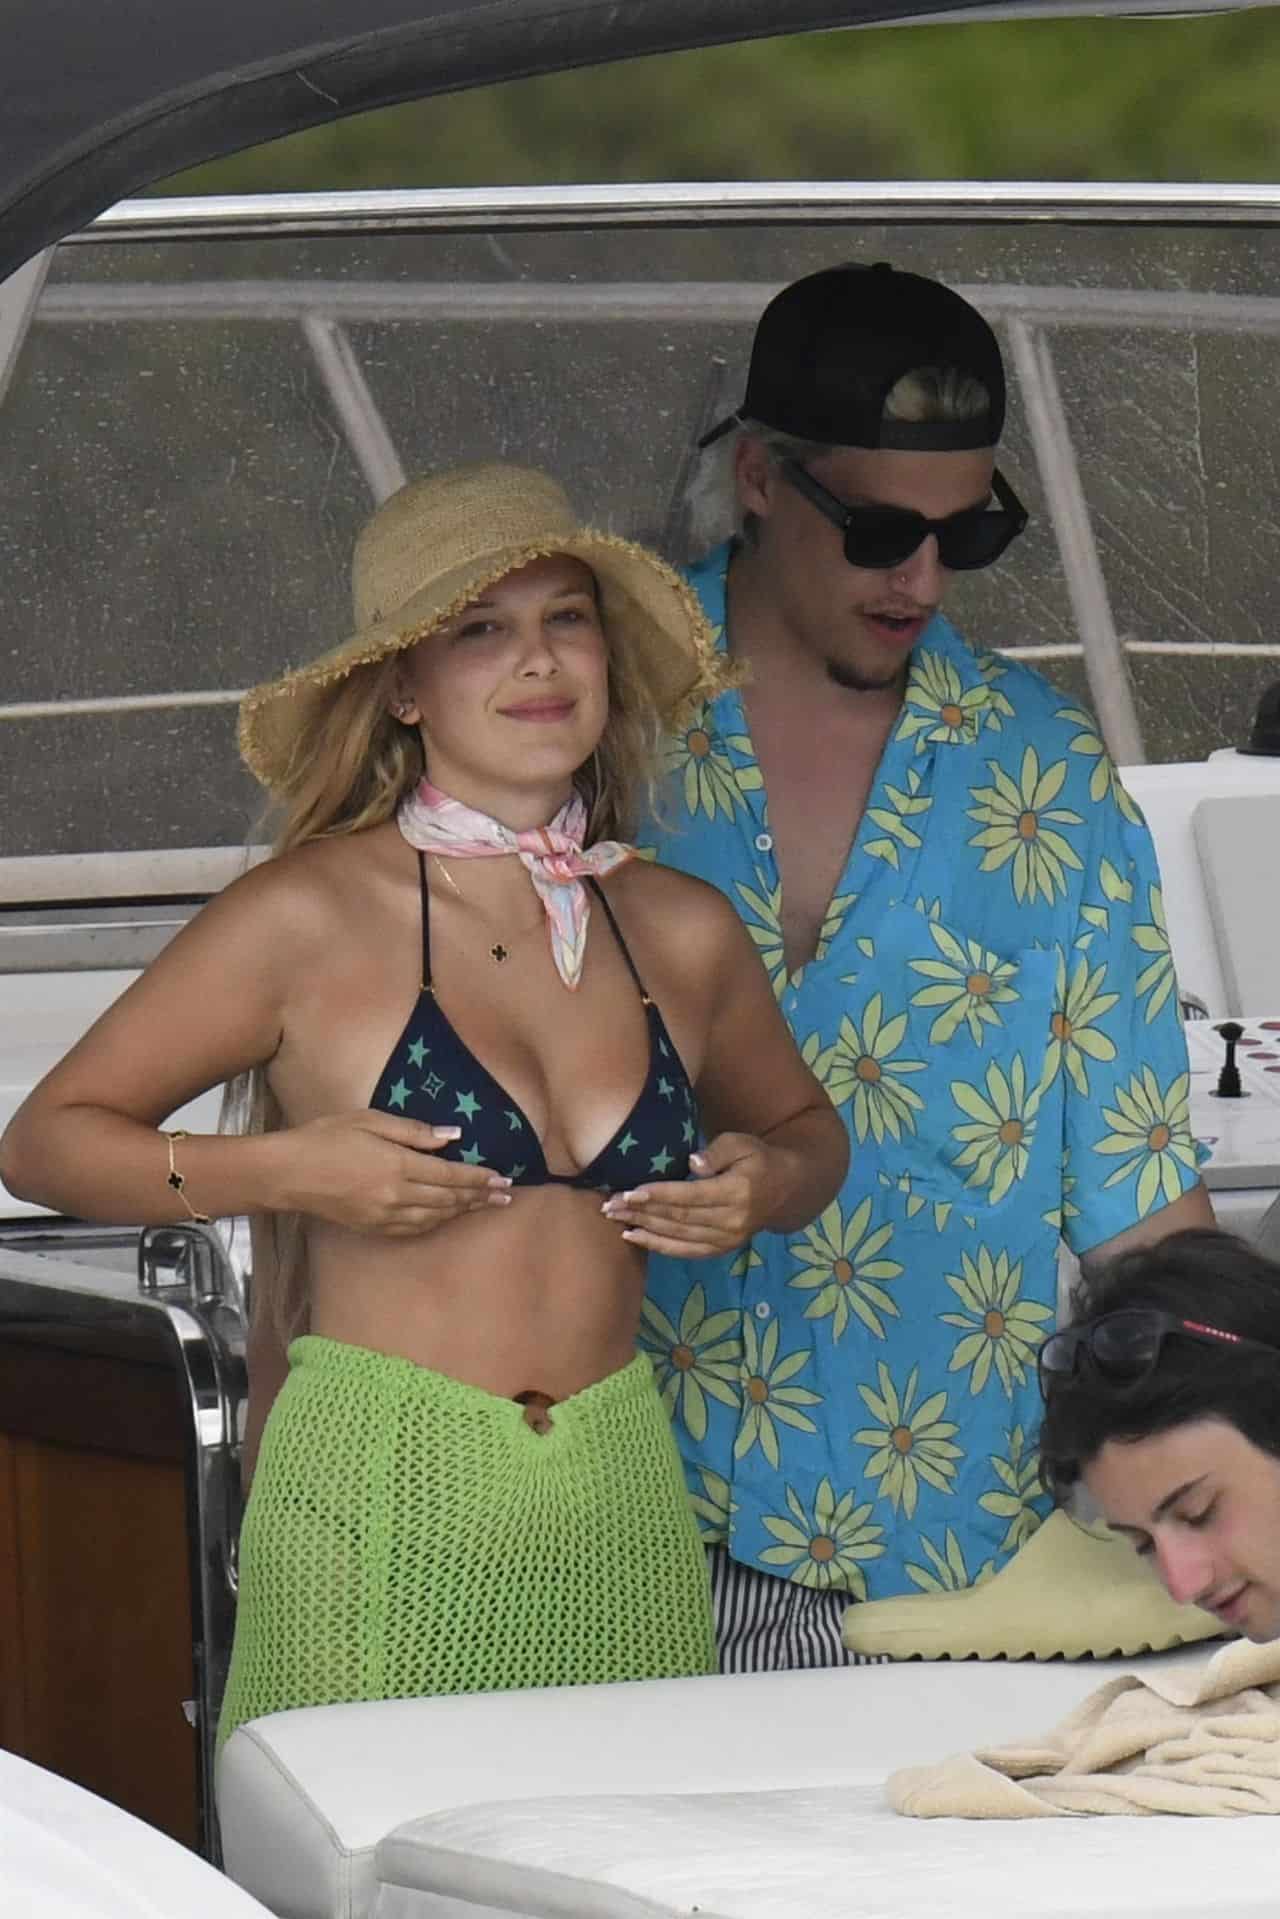 Millie Bobby Brown in a Bikini Top with Stars on a Luxury Yacht in Italy